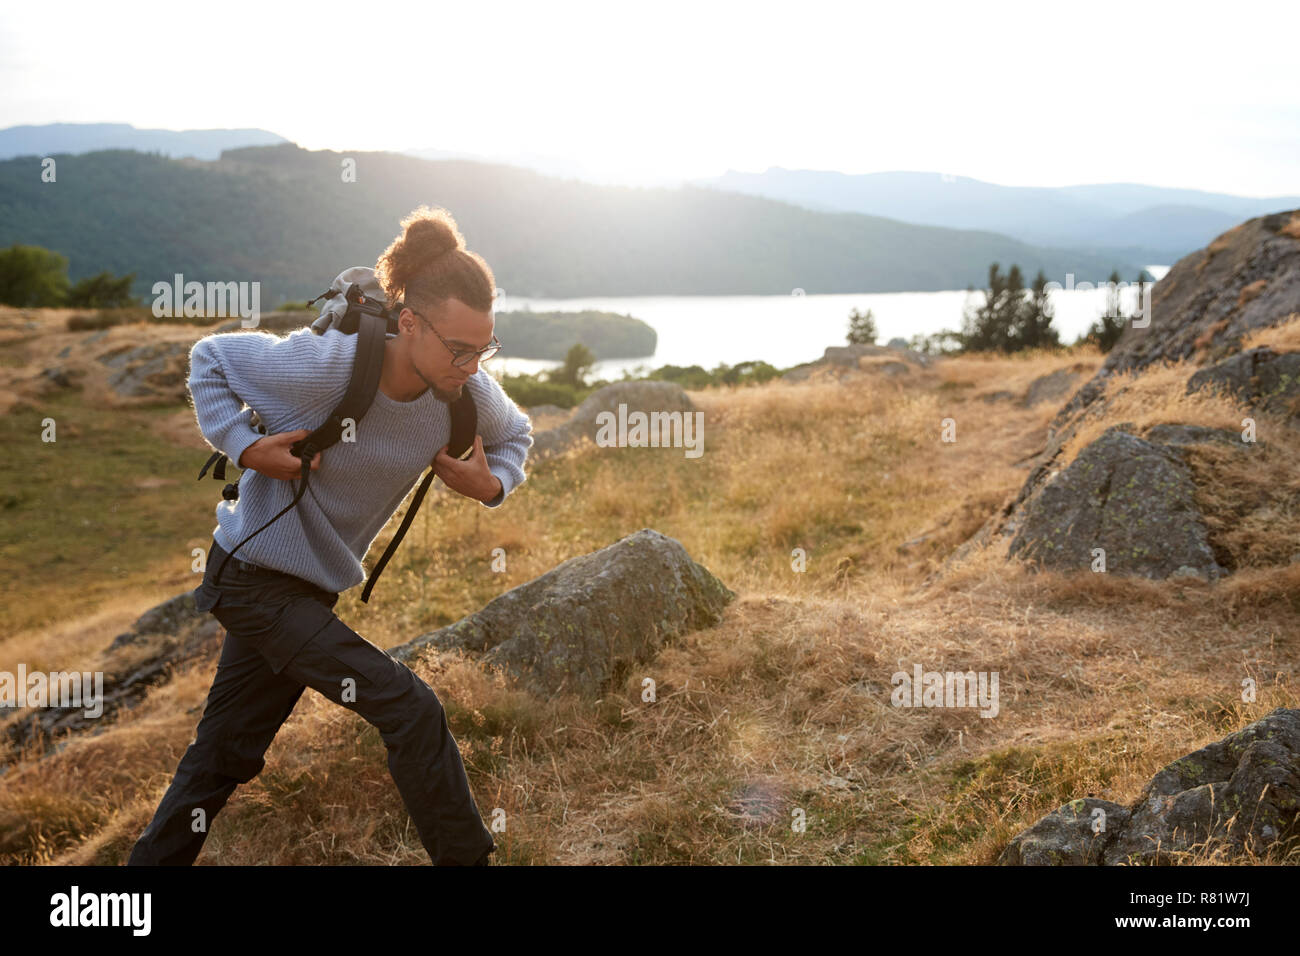 A young mixed race man running alone in the mountains Stock Photo